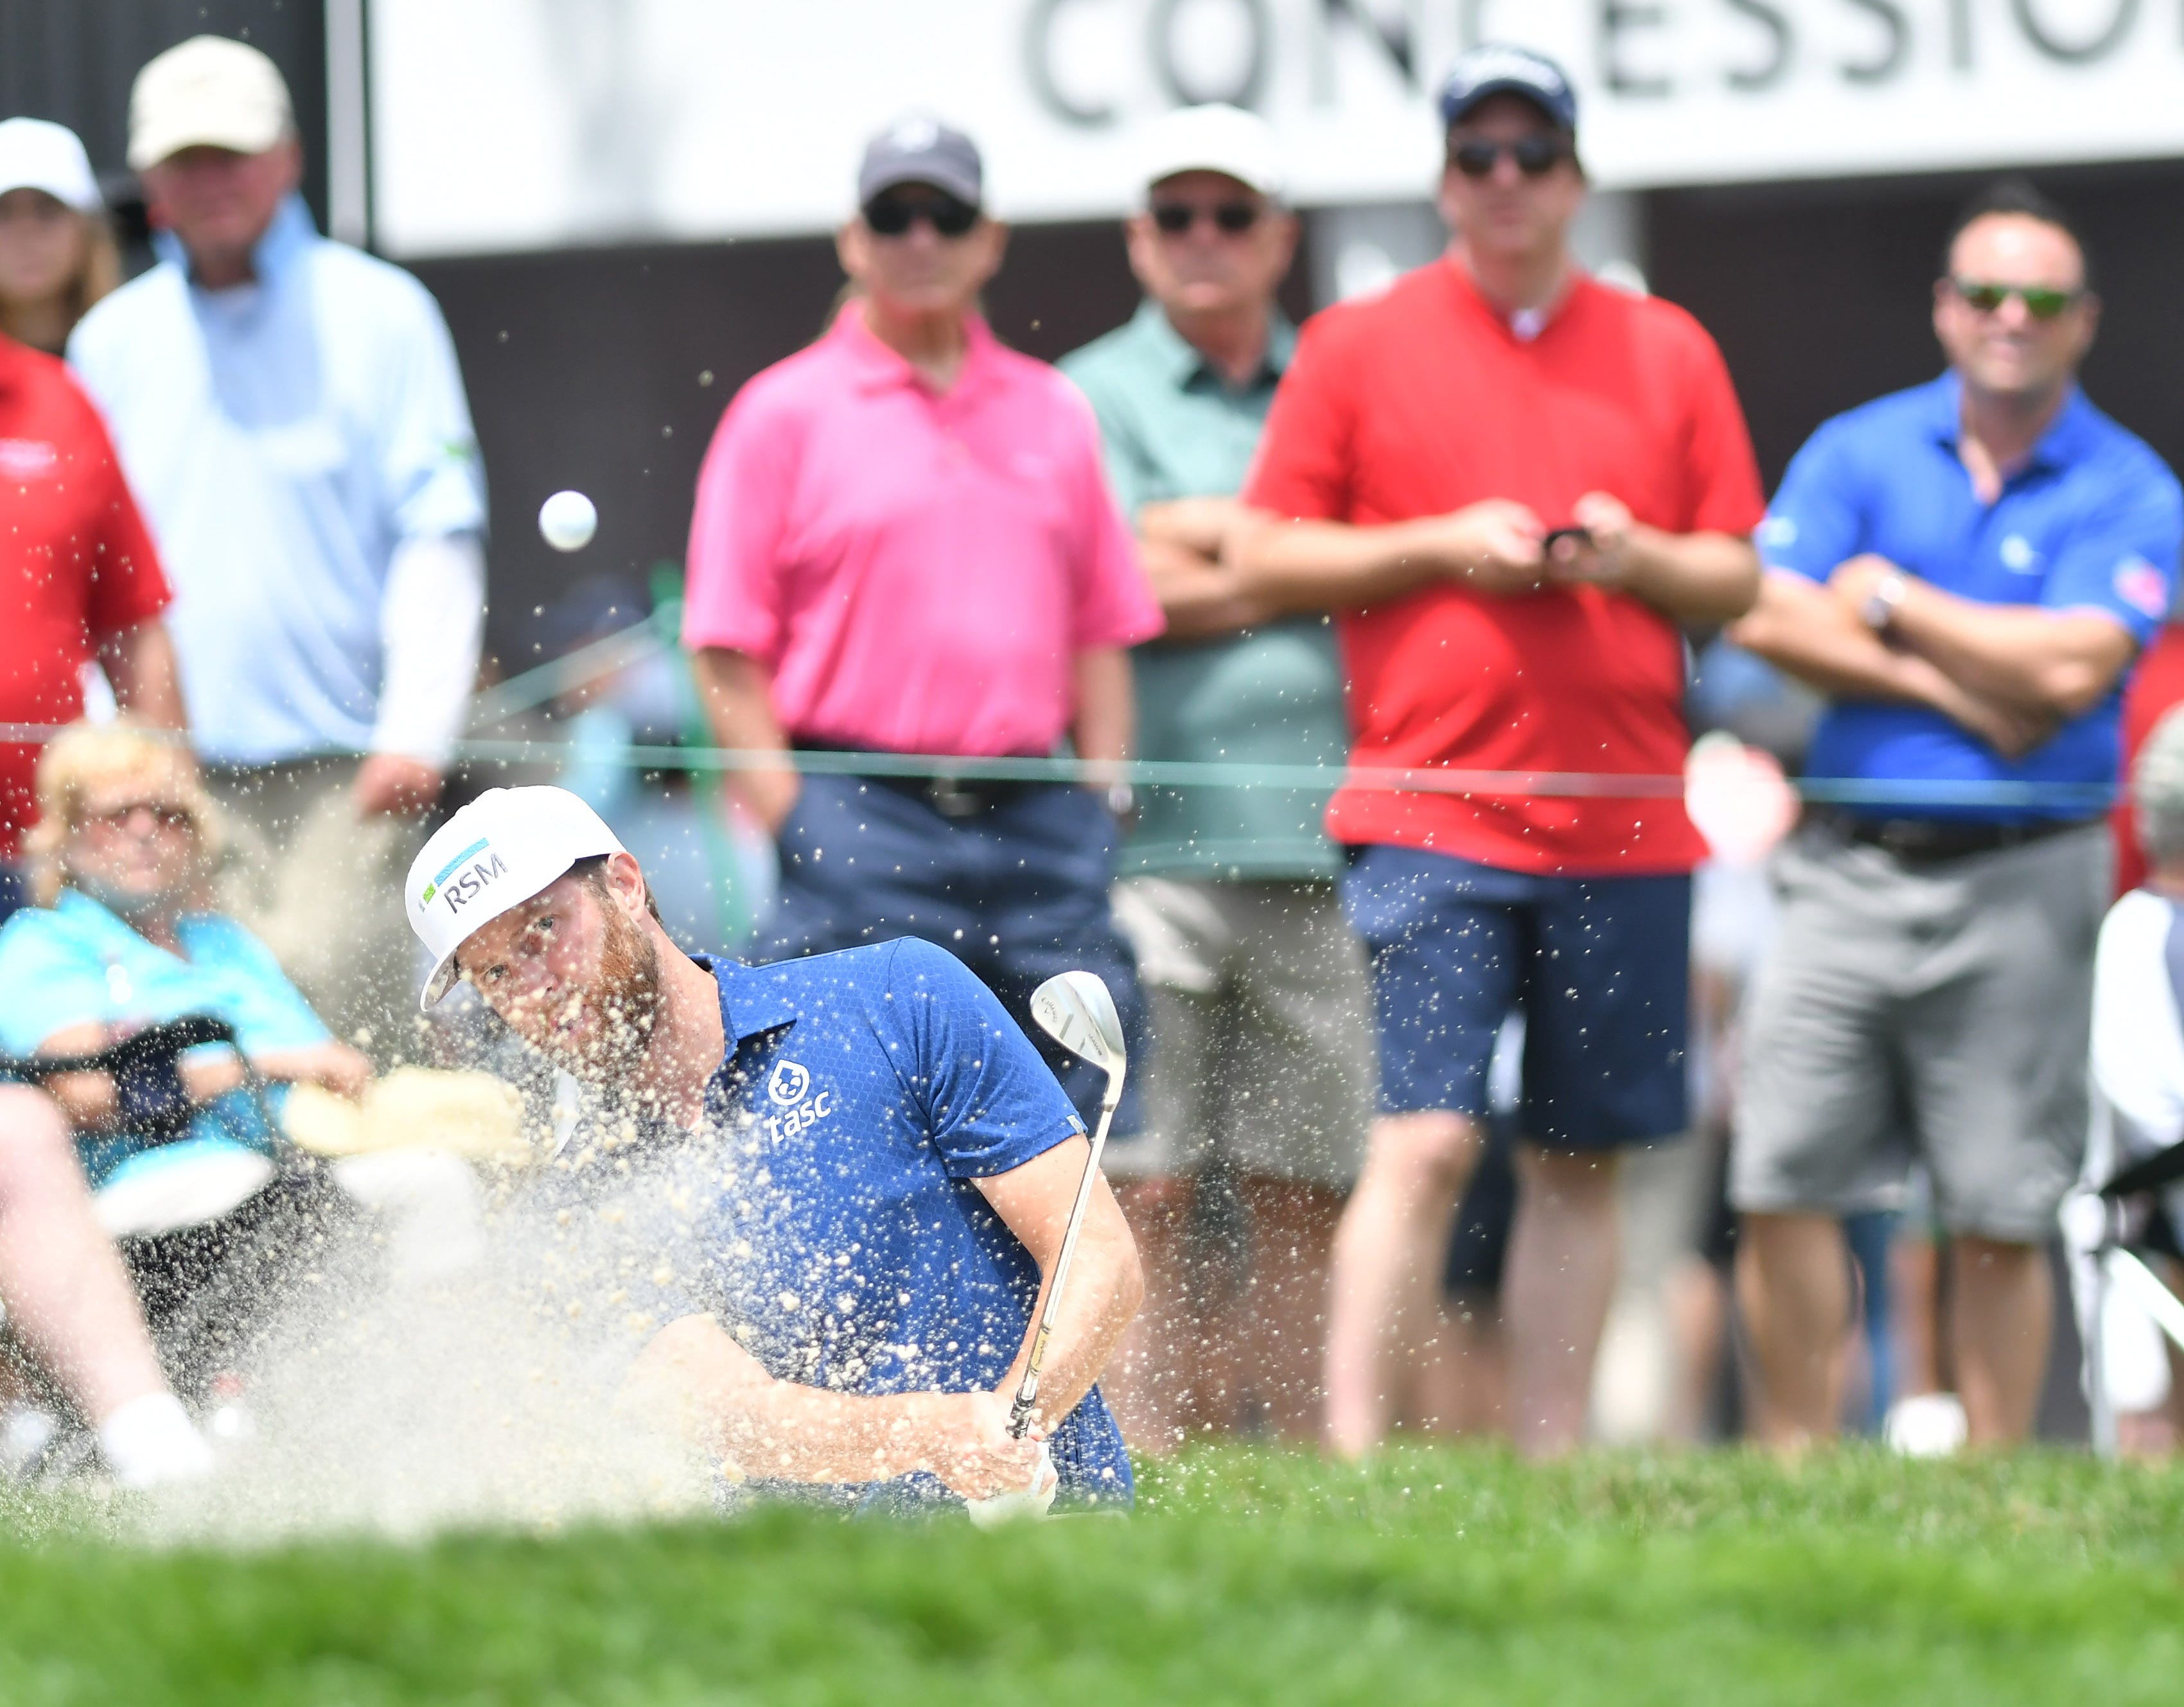 Chris Kirk hits out of the bunker on hole No. 9.